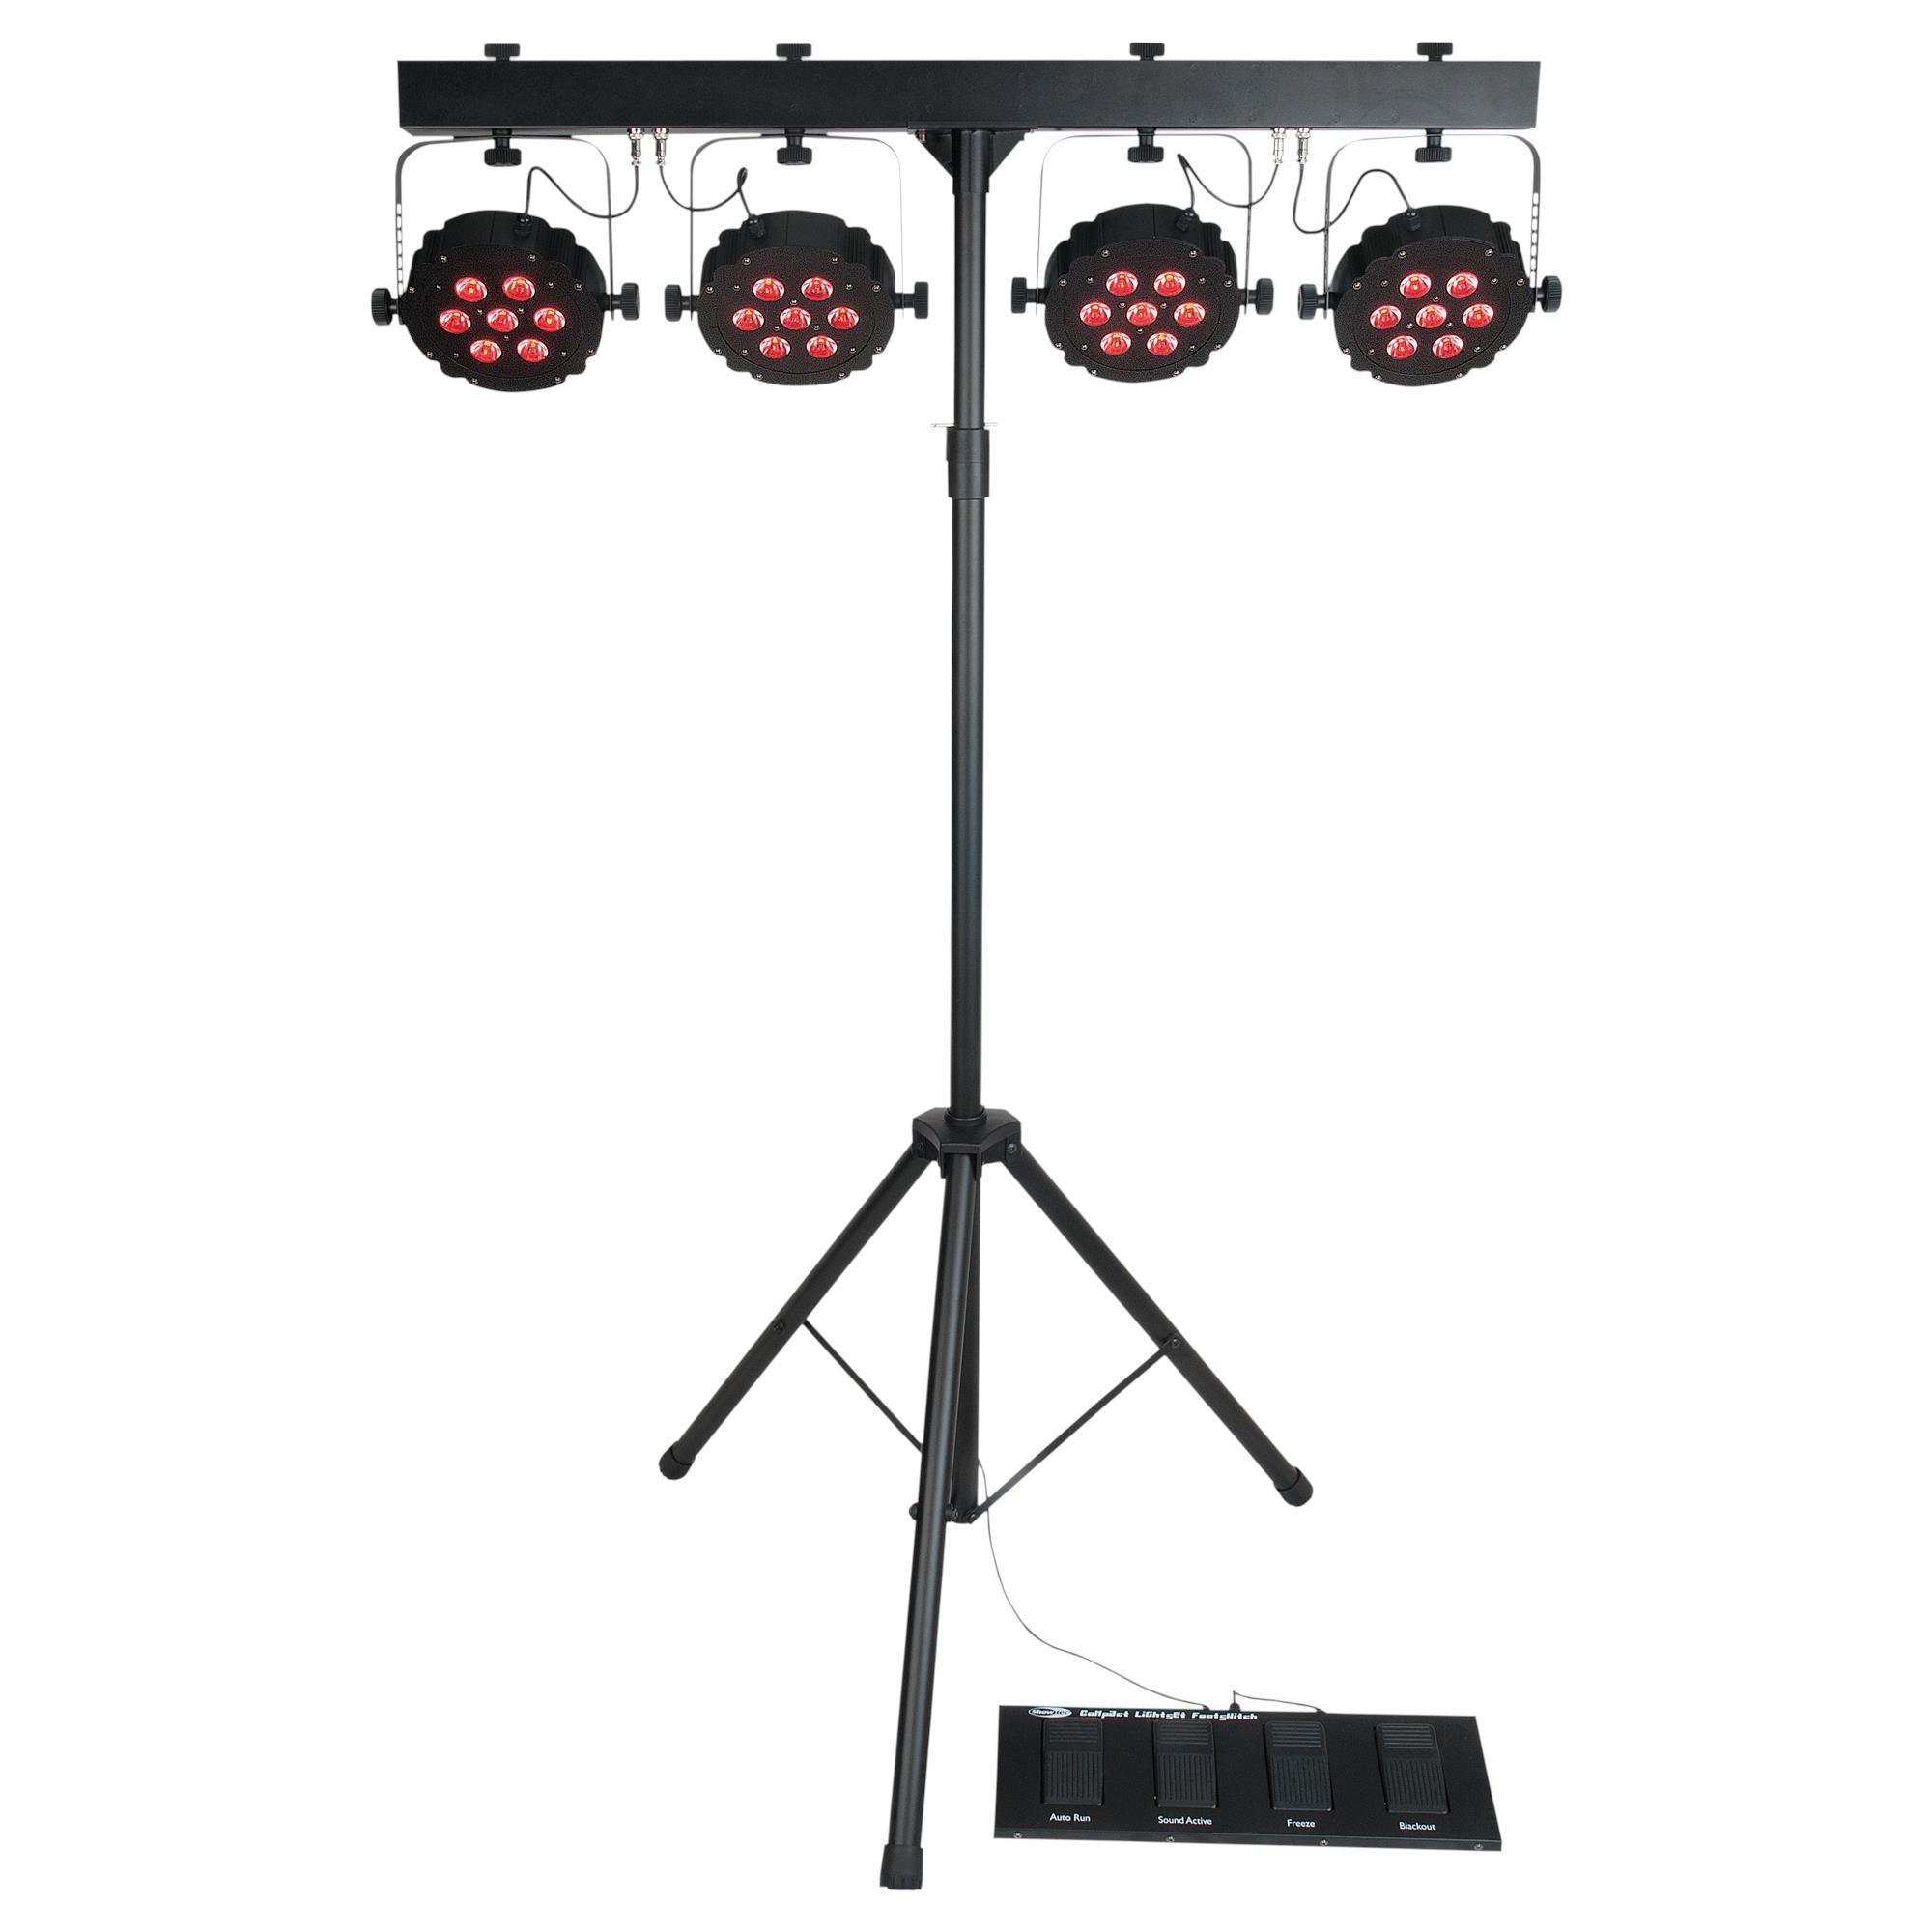 Showtec Compact Power Light Set MKII With Bag, Footswitch, and Stand - DY Pro Audio